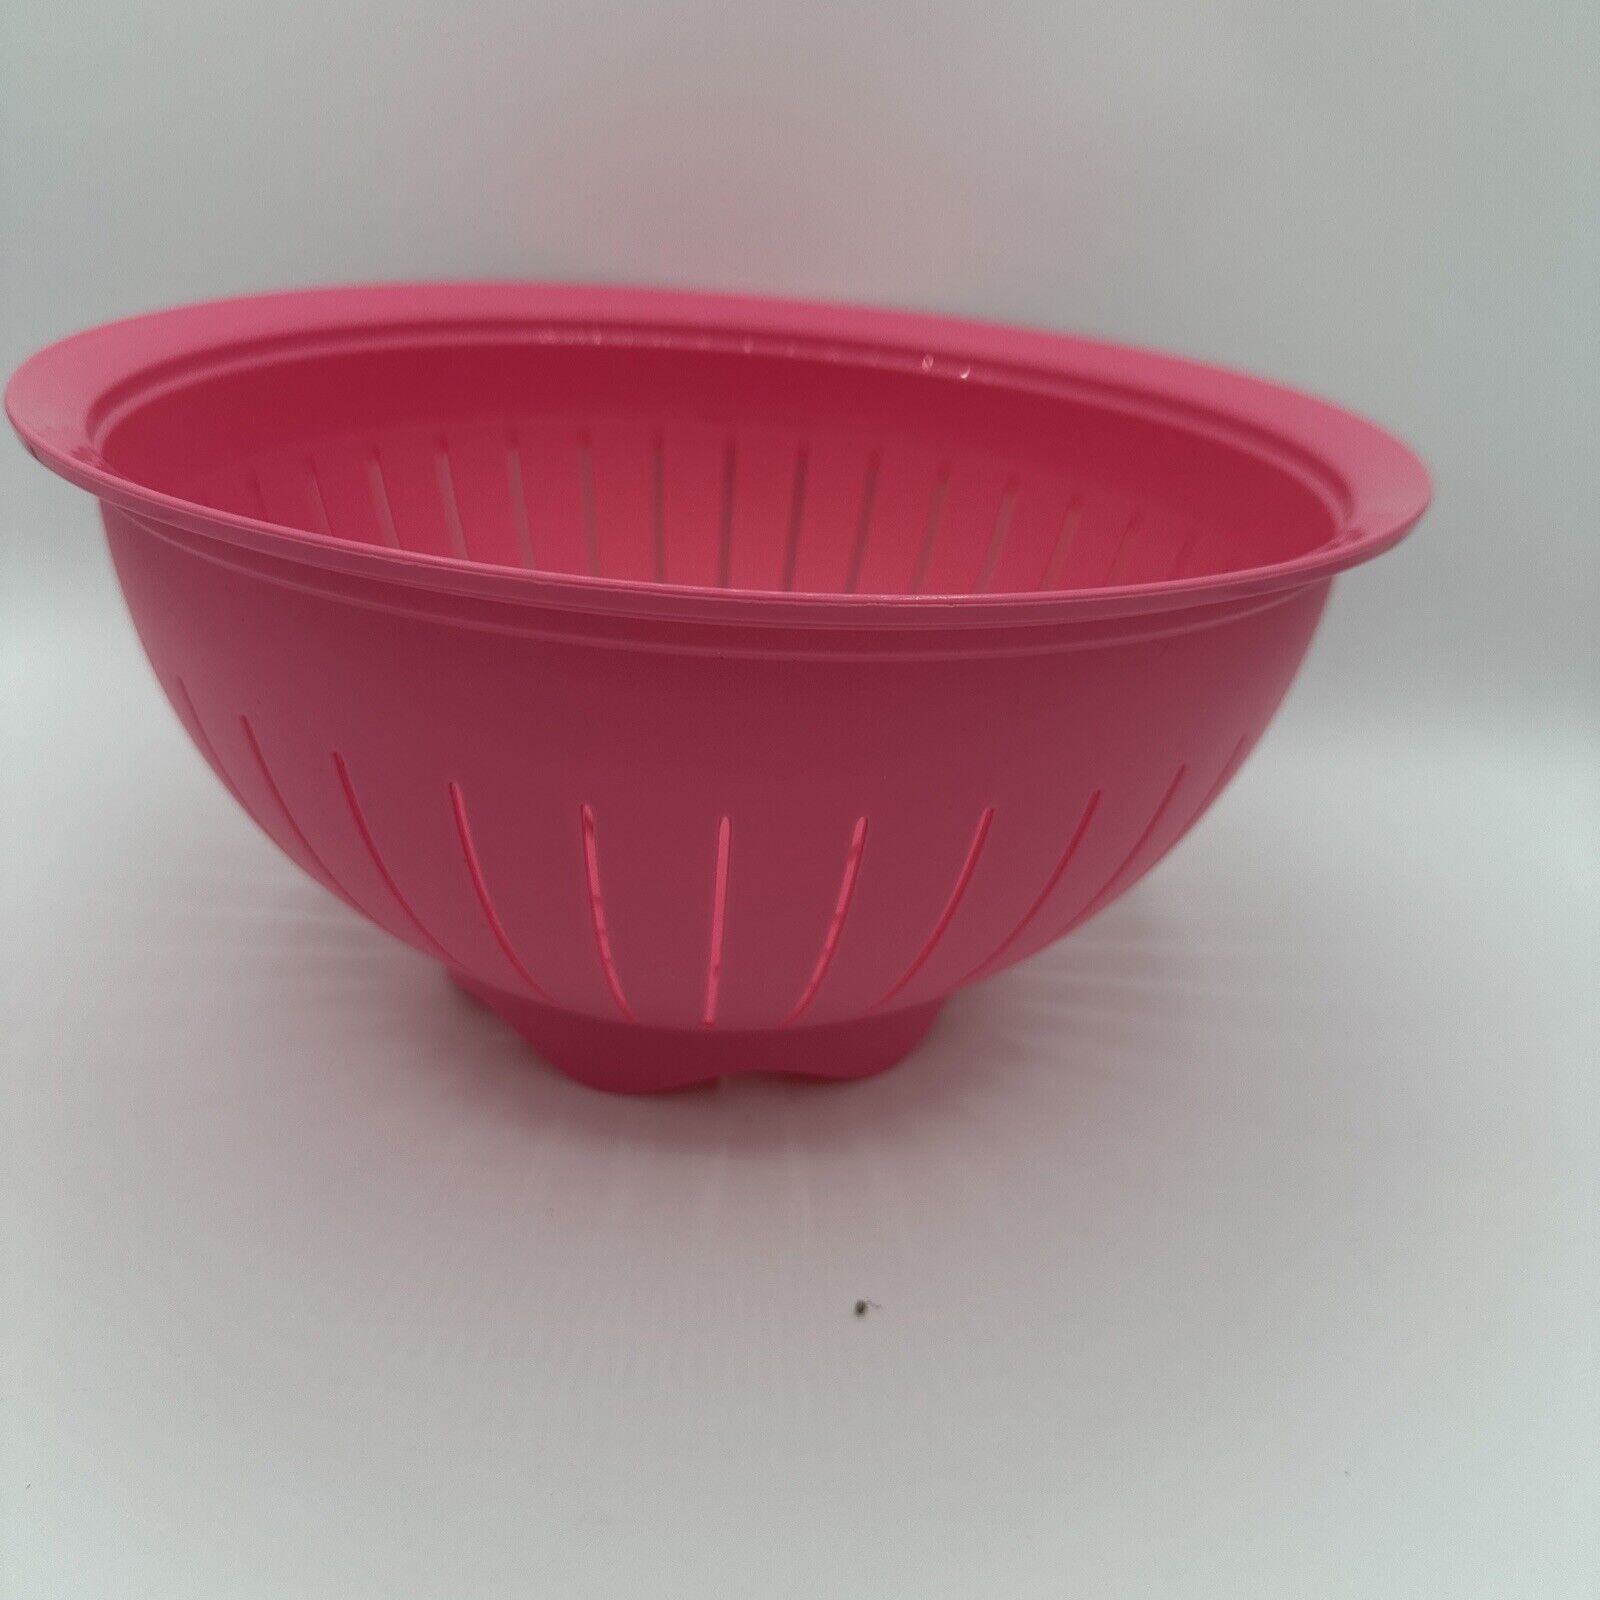 Tupperware Impressions Colander 18 cup/ 4.3L Jellyfish Pink Color New